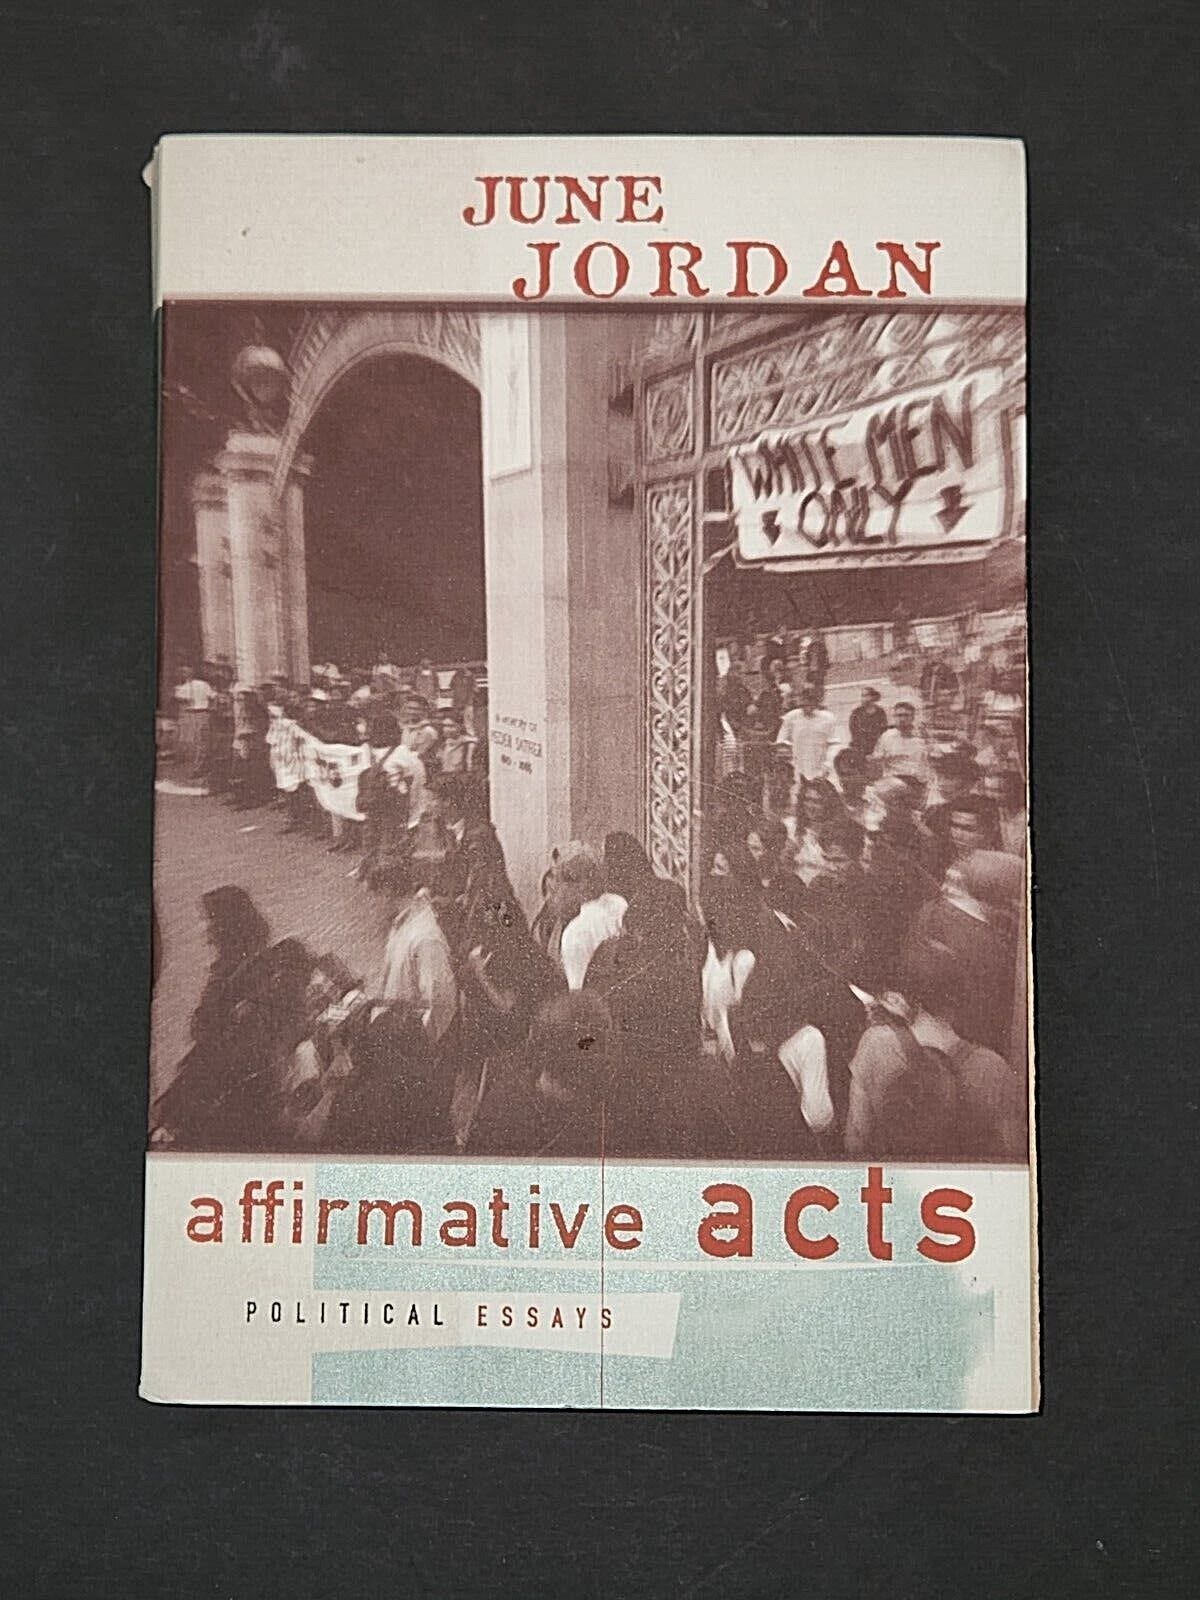 image of the cover of June Jordan's Affirmative Acts. it shows a protest by many people of many races and genders under a sign that says "white men only"